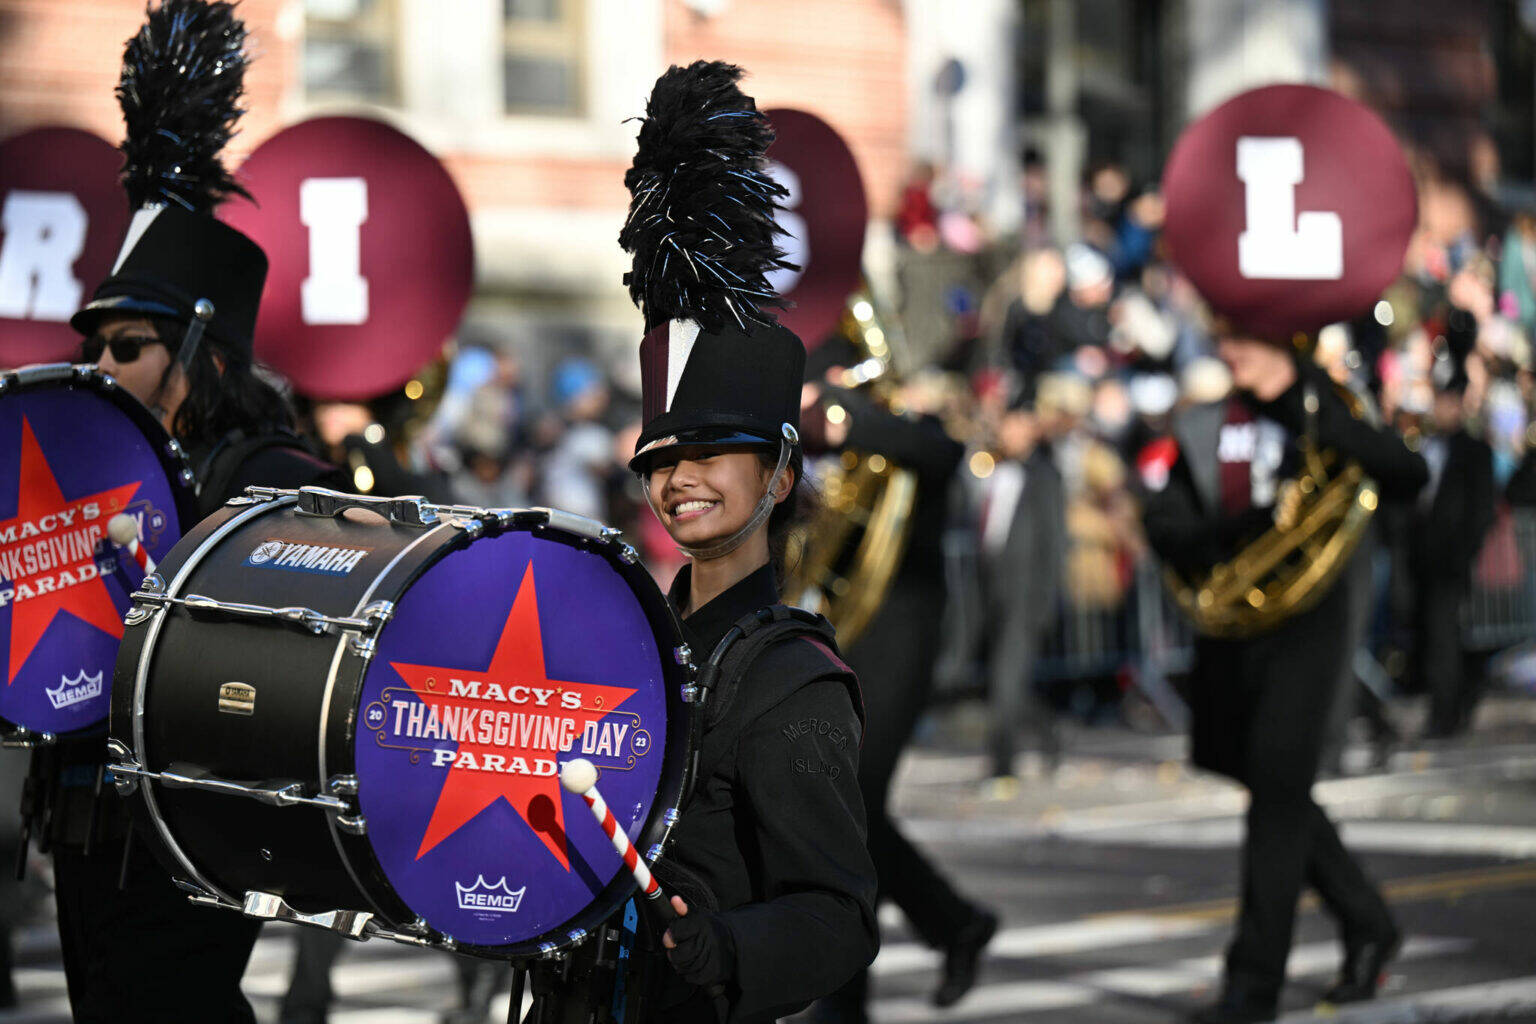 Mercer Island High School’s marching band hit the big time in the Big Apple by performing in the 97th Macy’s Thanksgiving Day Parade in New York City. Photo courtesy of James Jantos